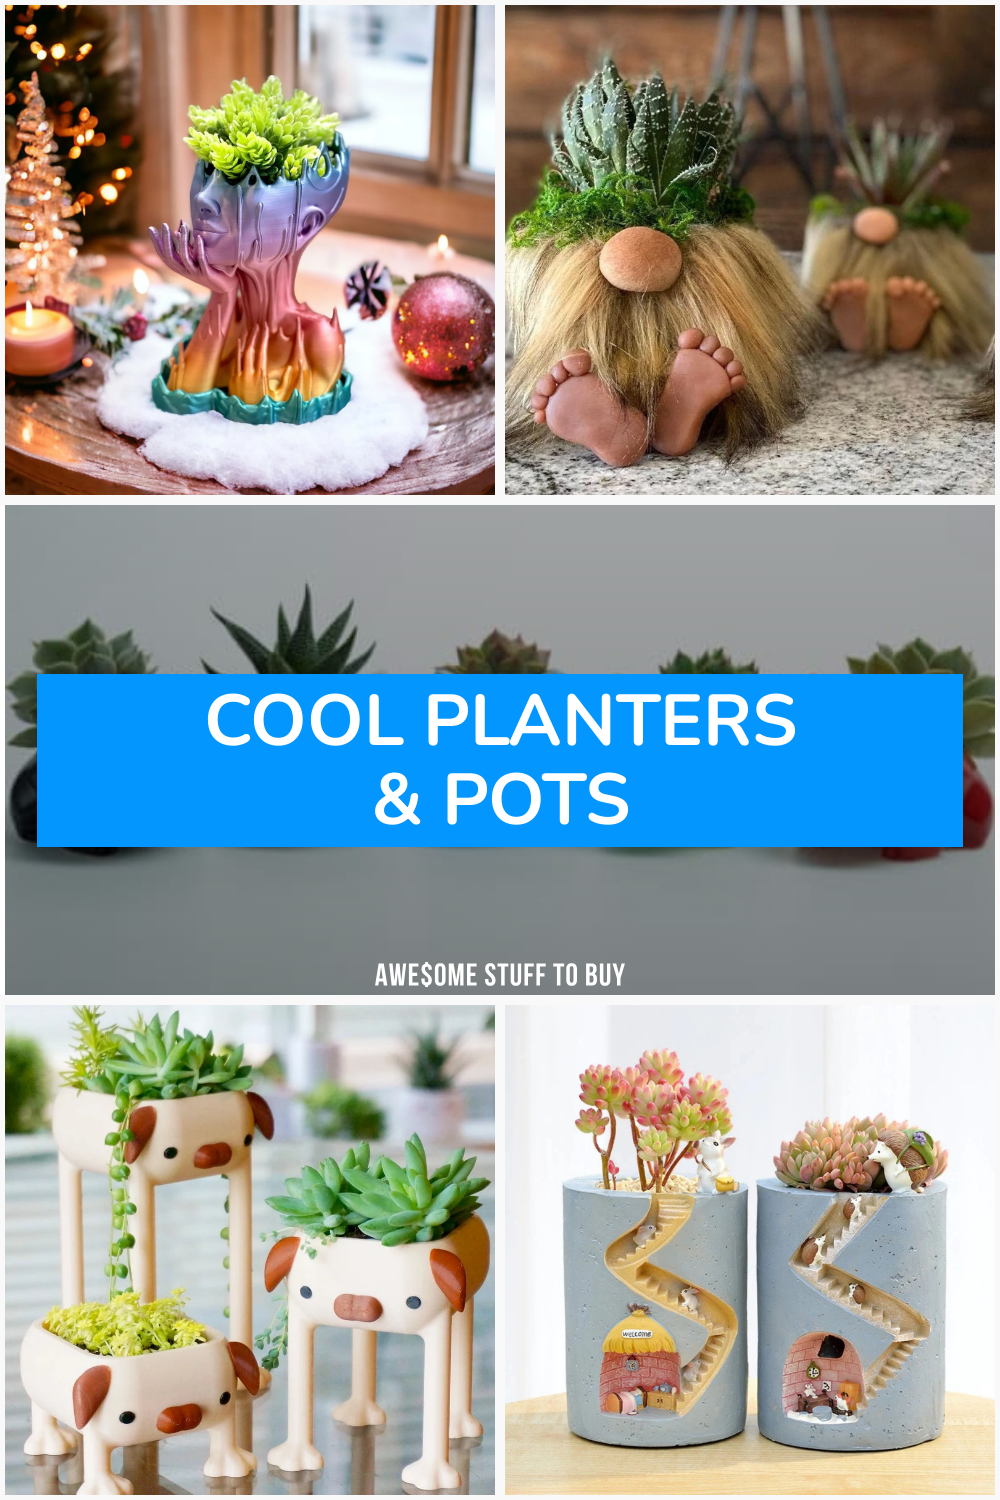 Cool Planters & Pots // Awesome Stuff to Buy